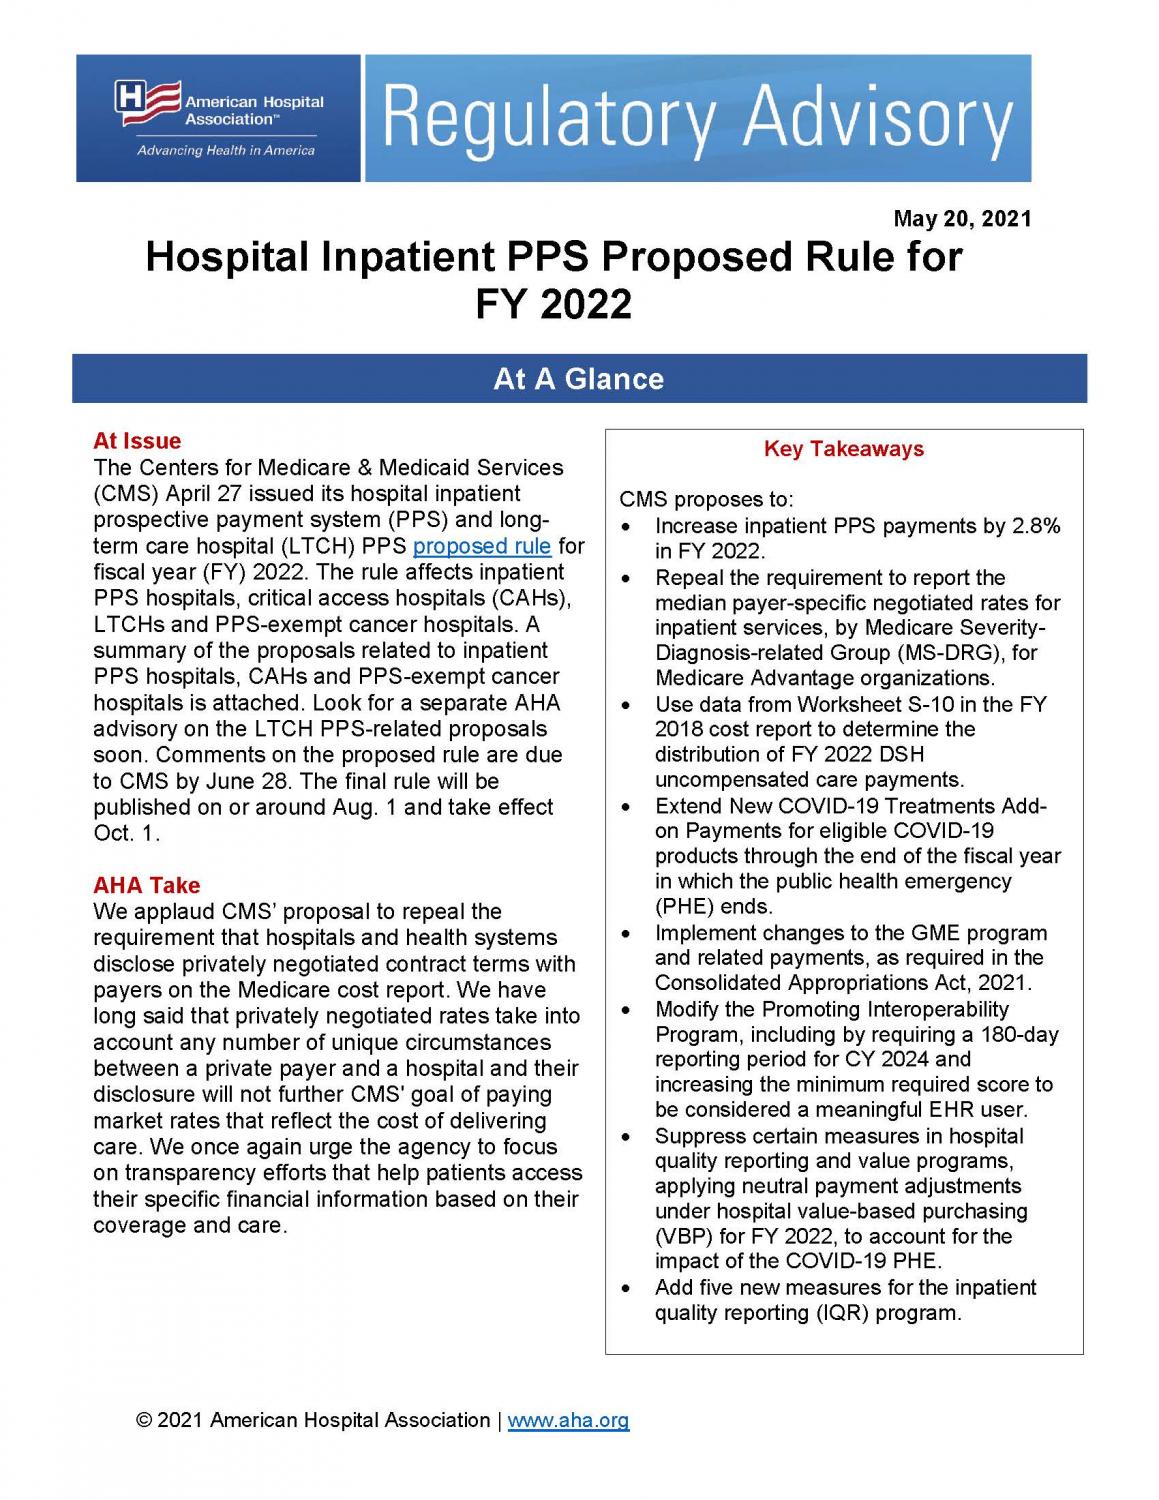 Regulatory Advisory: Hospital Inpatient PPS Proposed Rule for FY 2022 page 1. May 20, 2021.